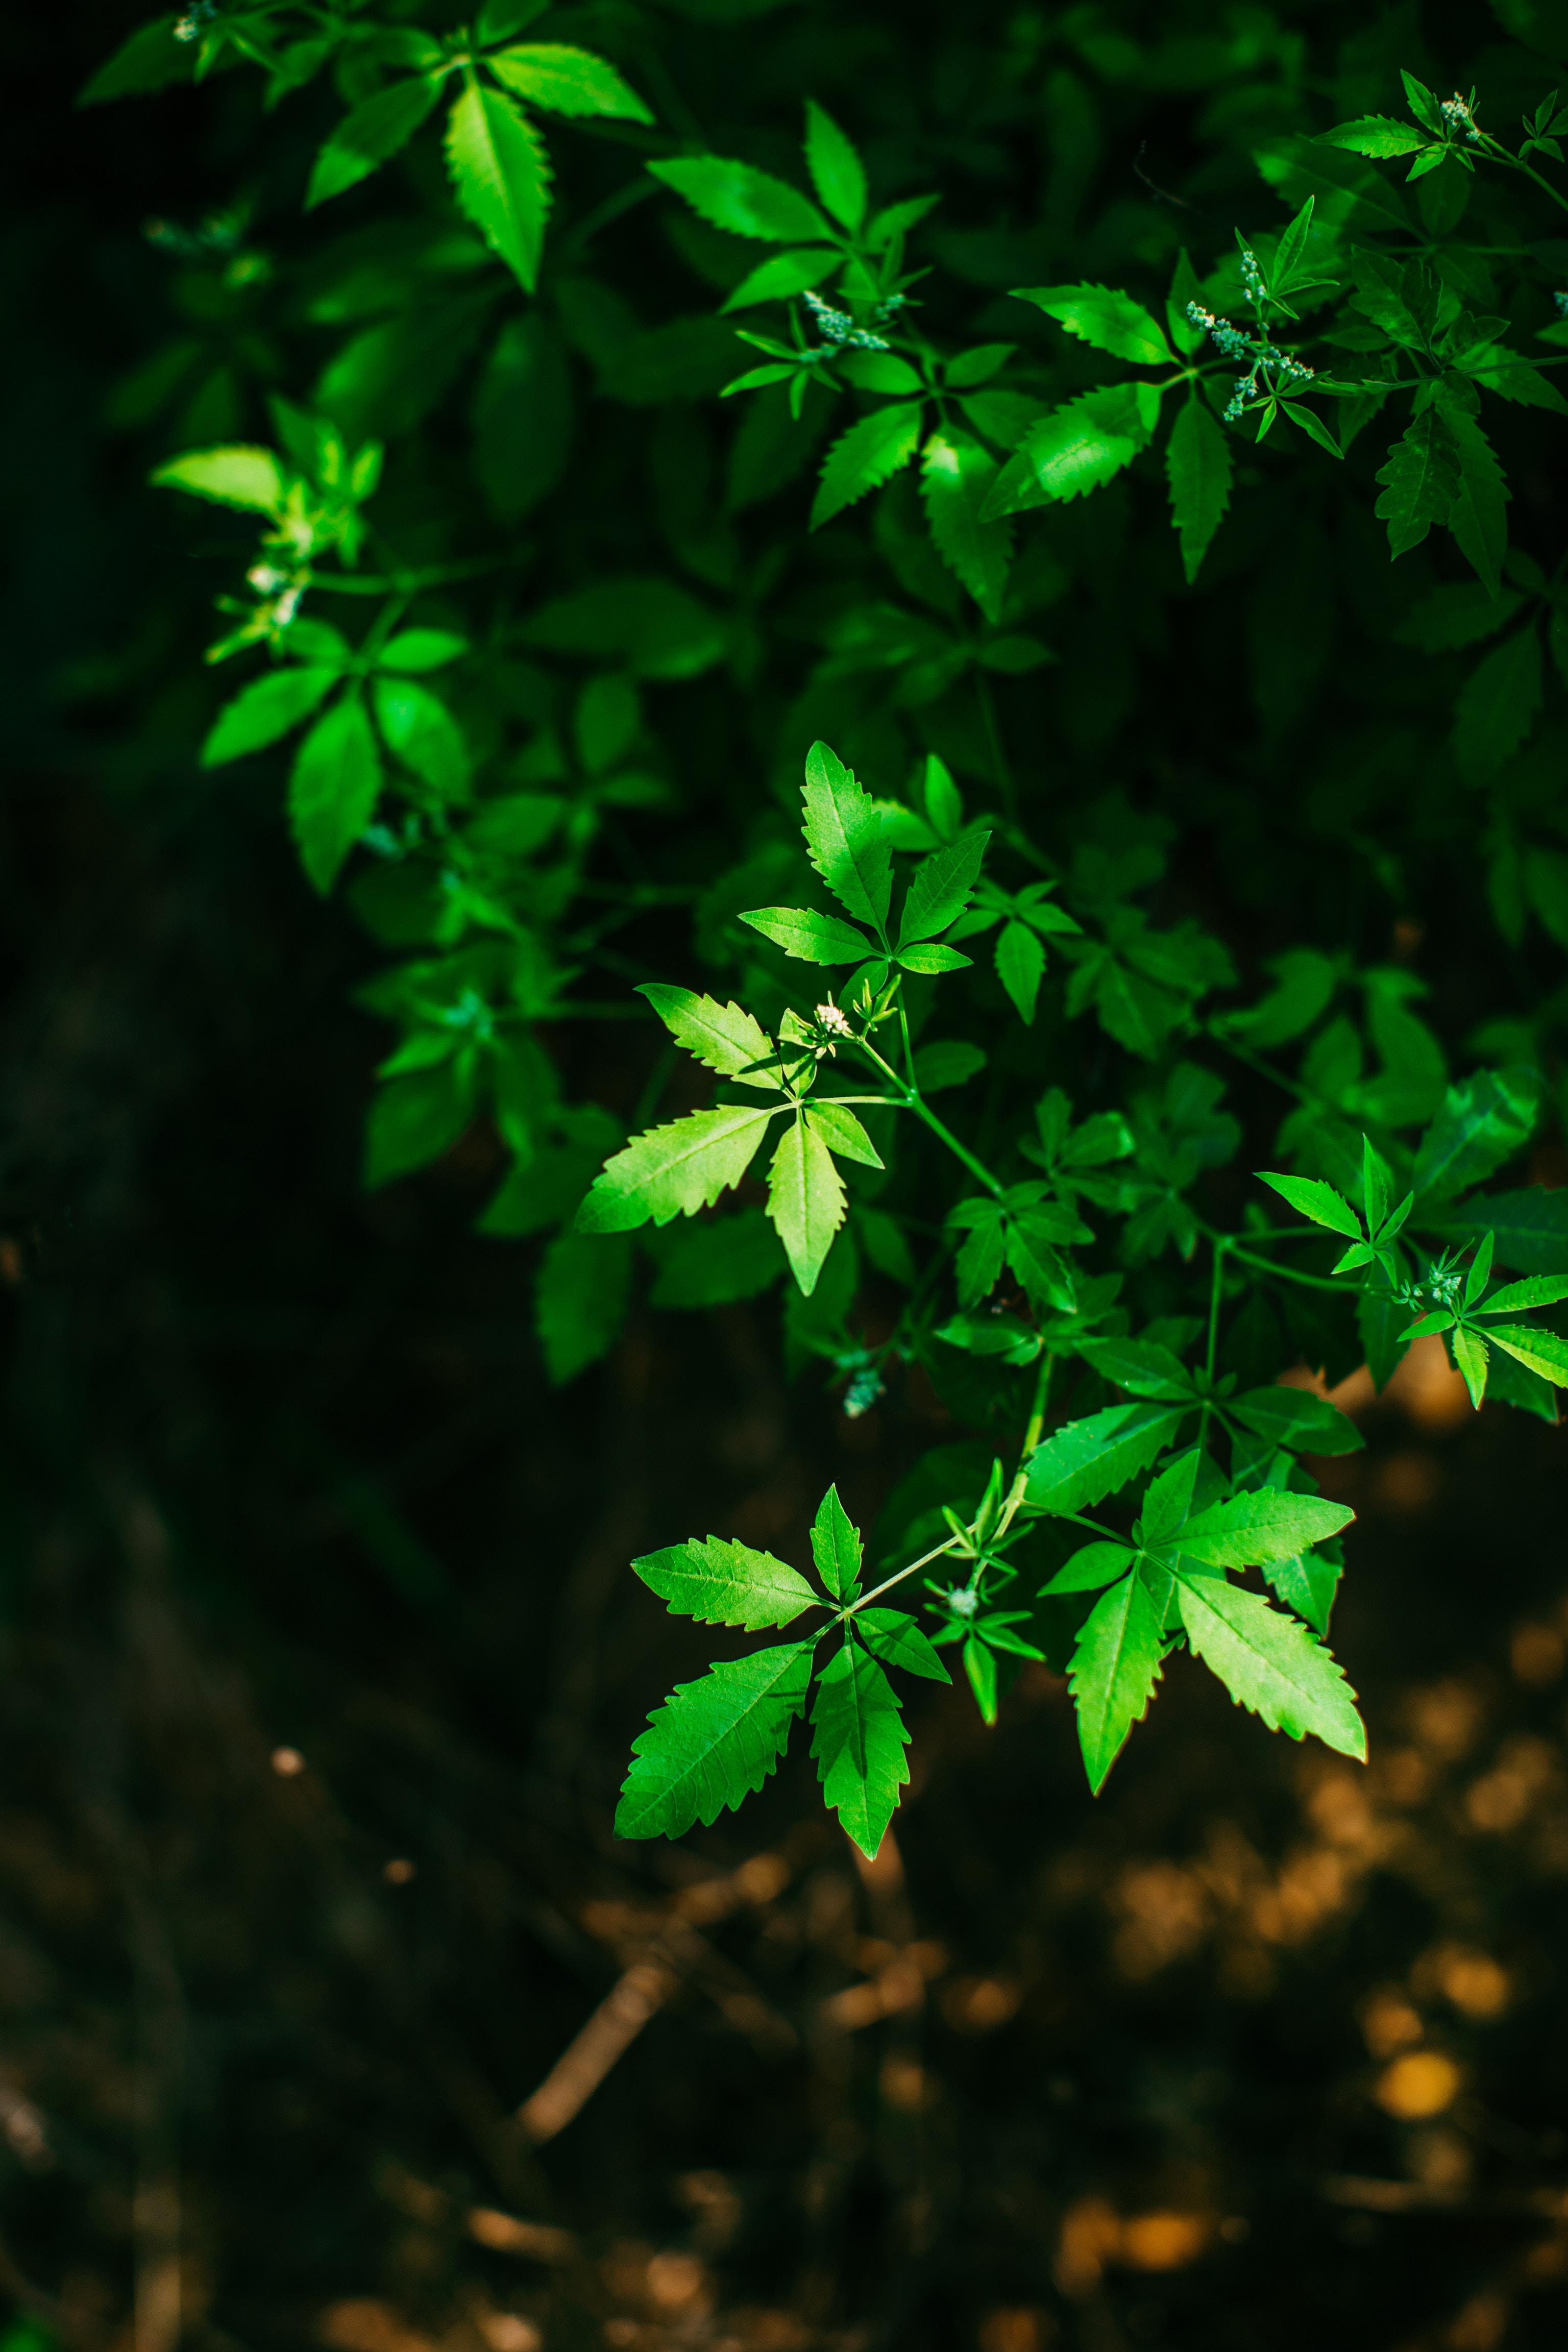 carved, smooth, blur, branches, green, leaves, plant, macro